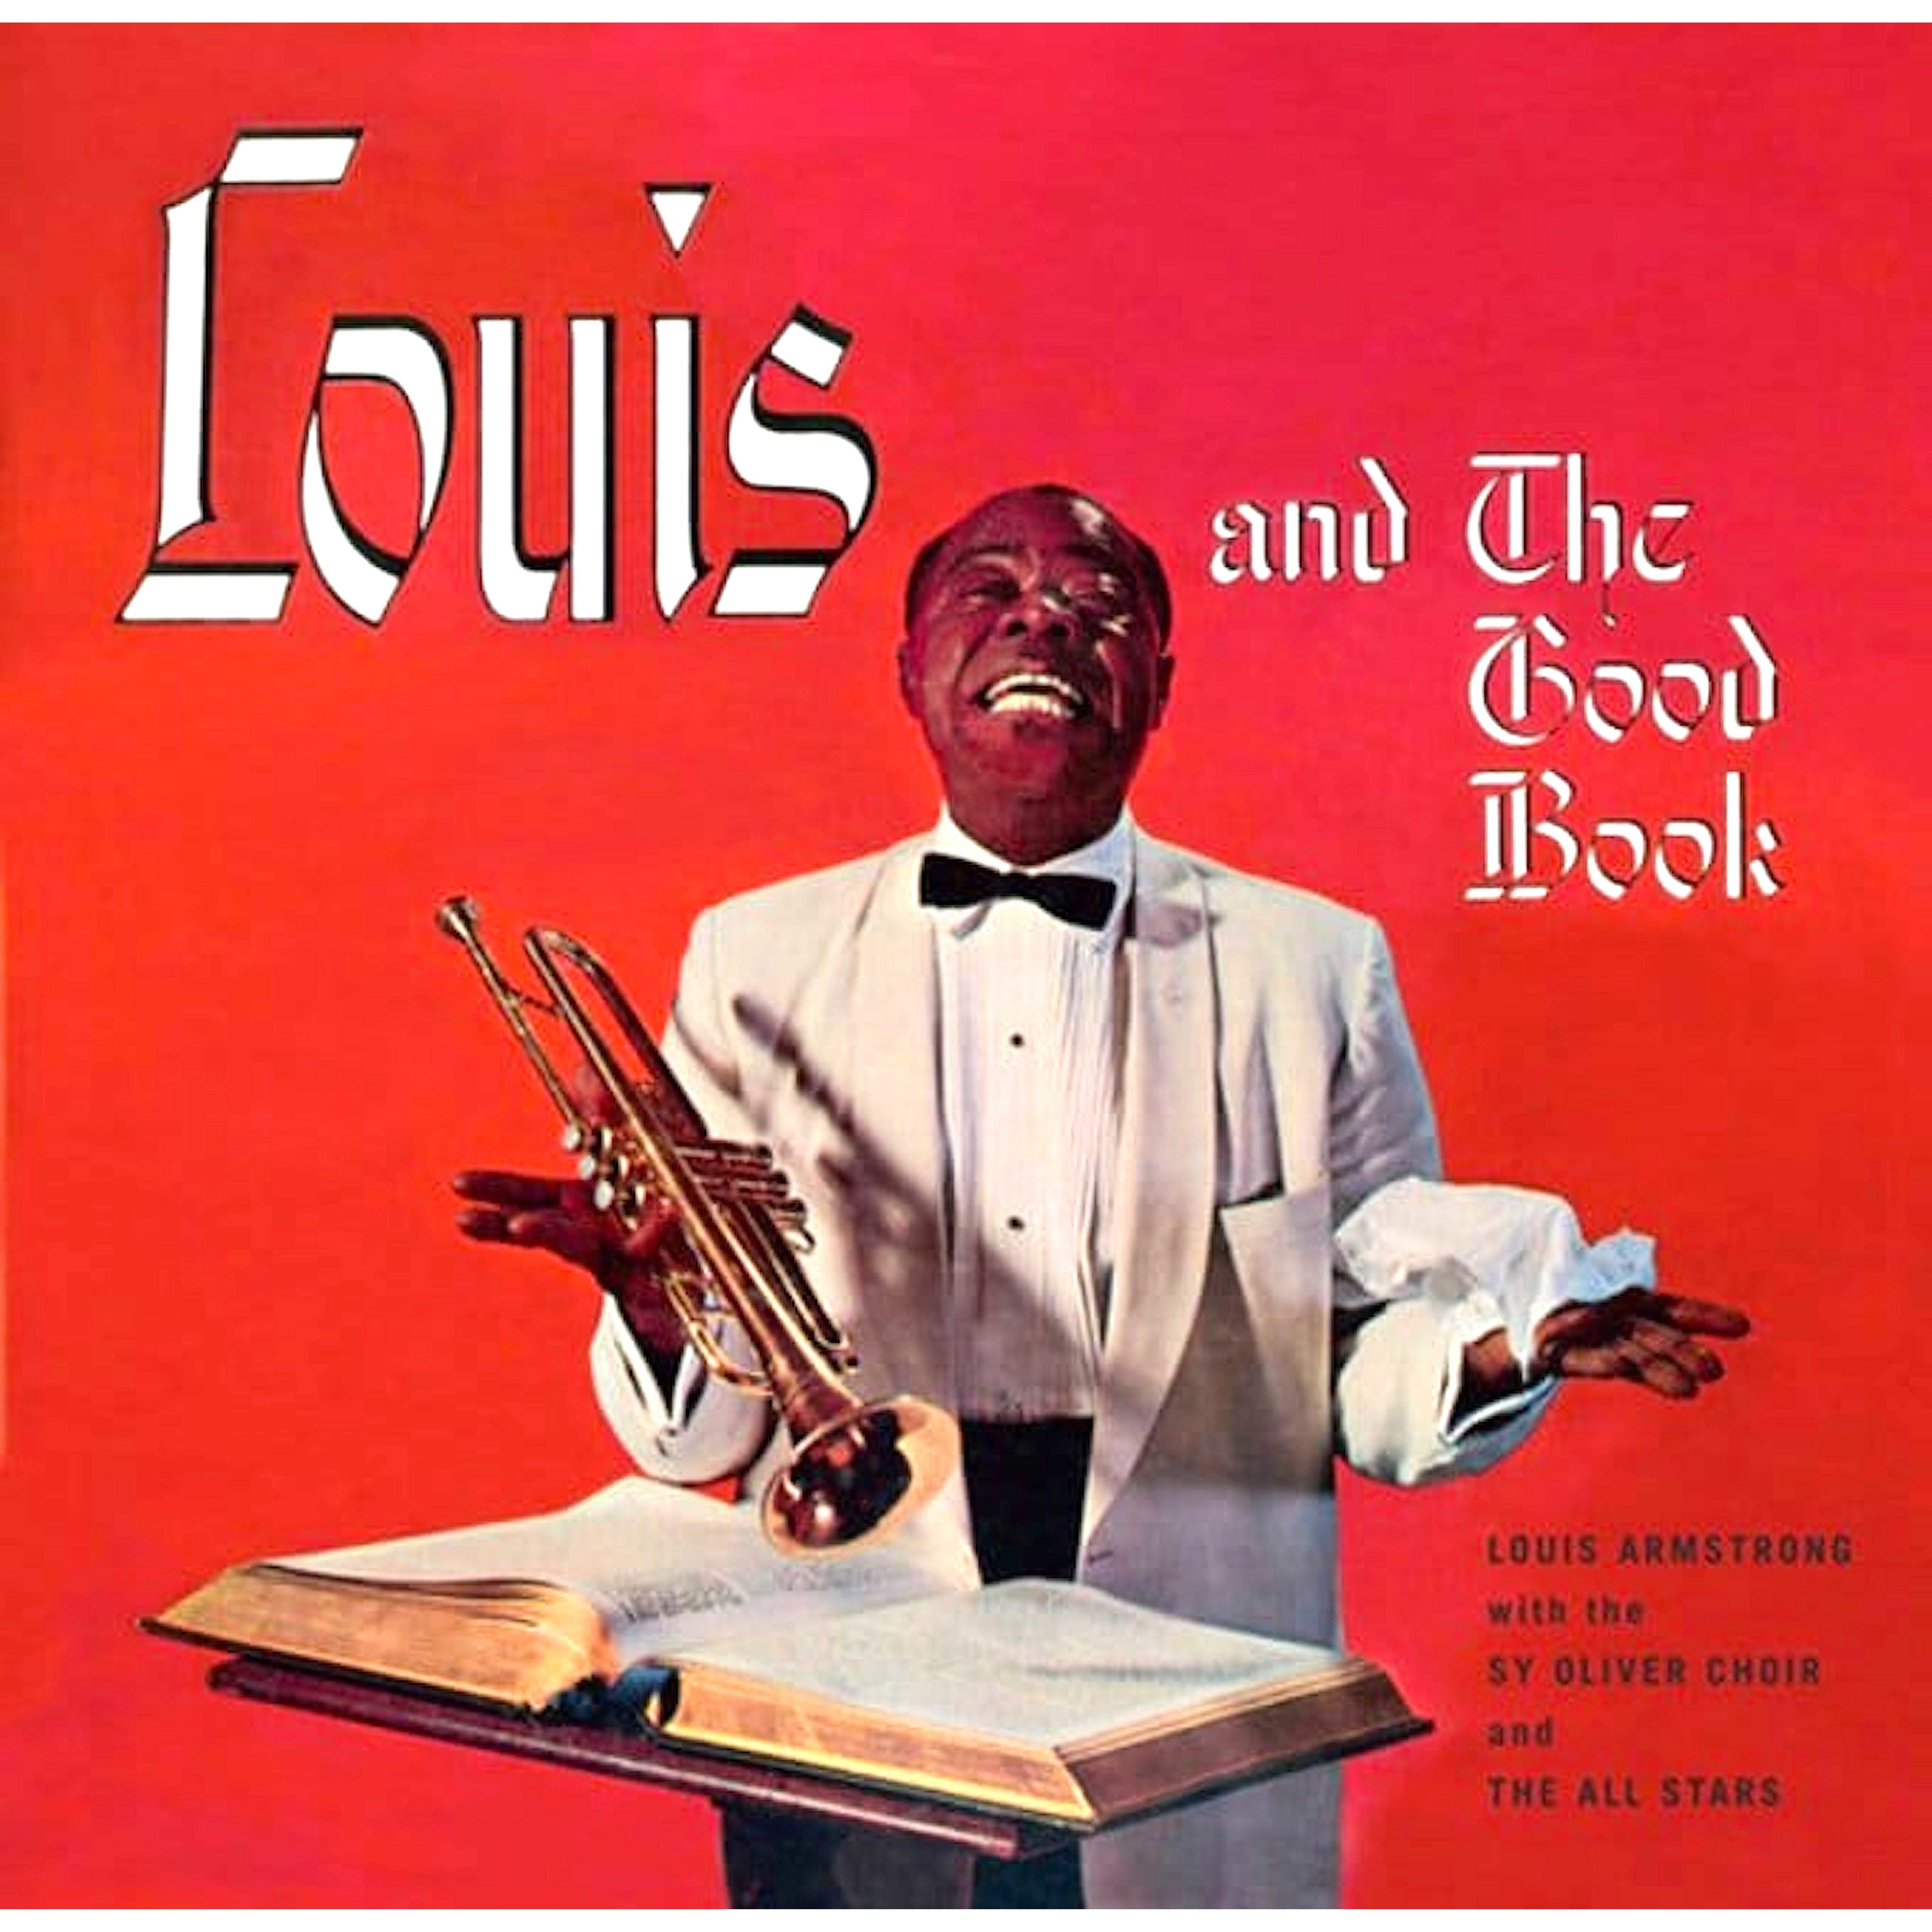 Louis Armstrong - Louis And The Good Book (1958/2020) [FLAC 24bit/96kHz]